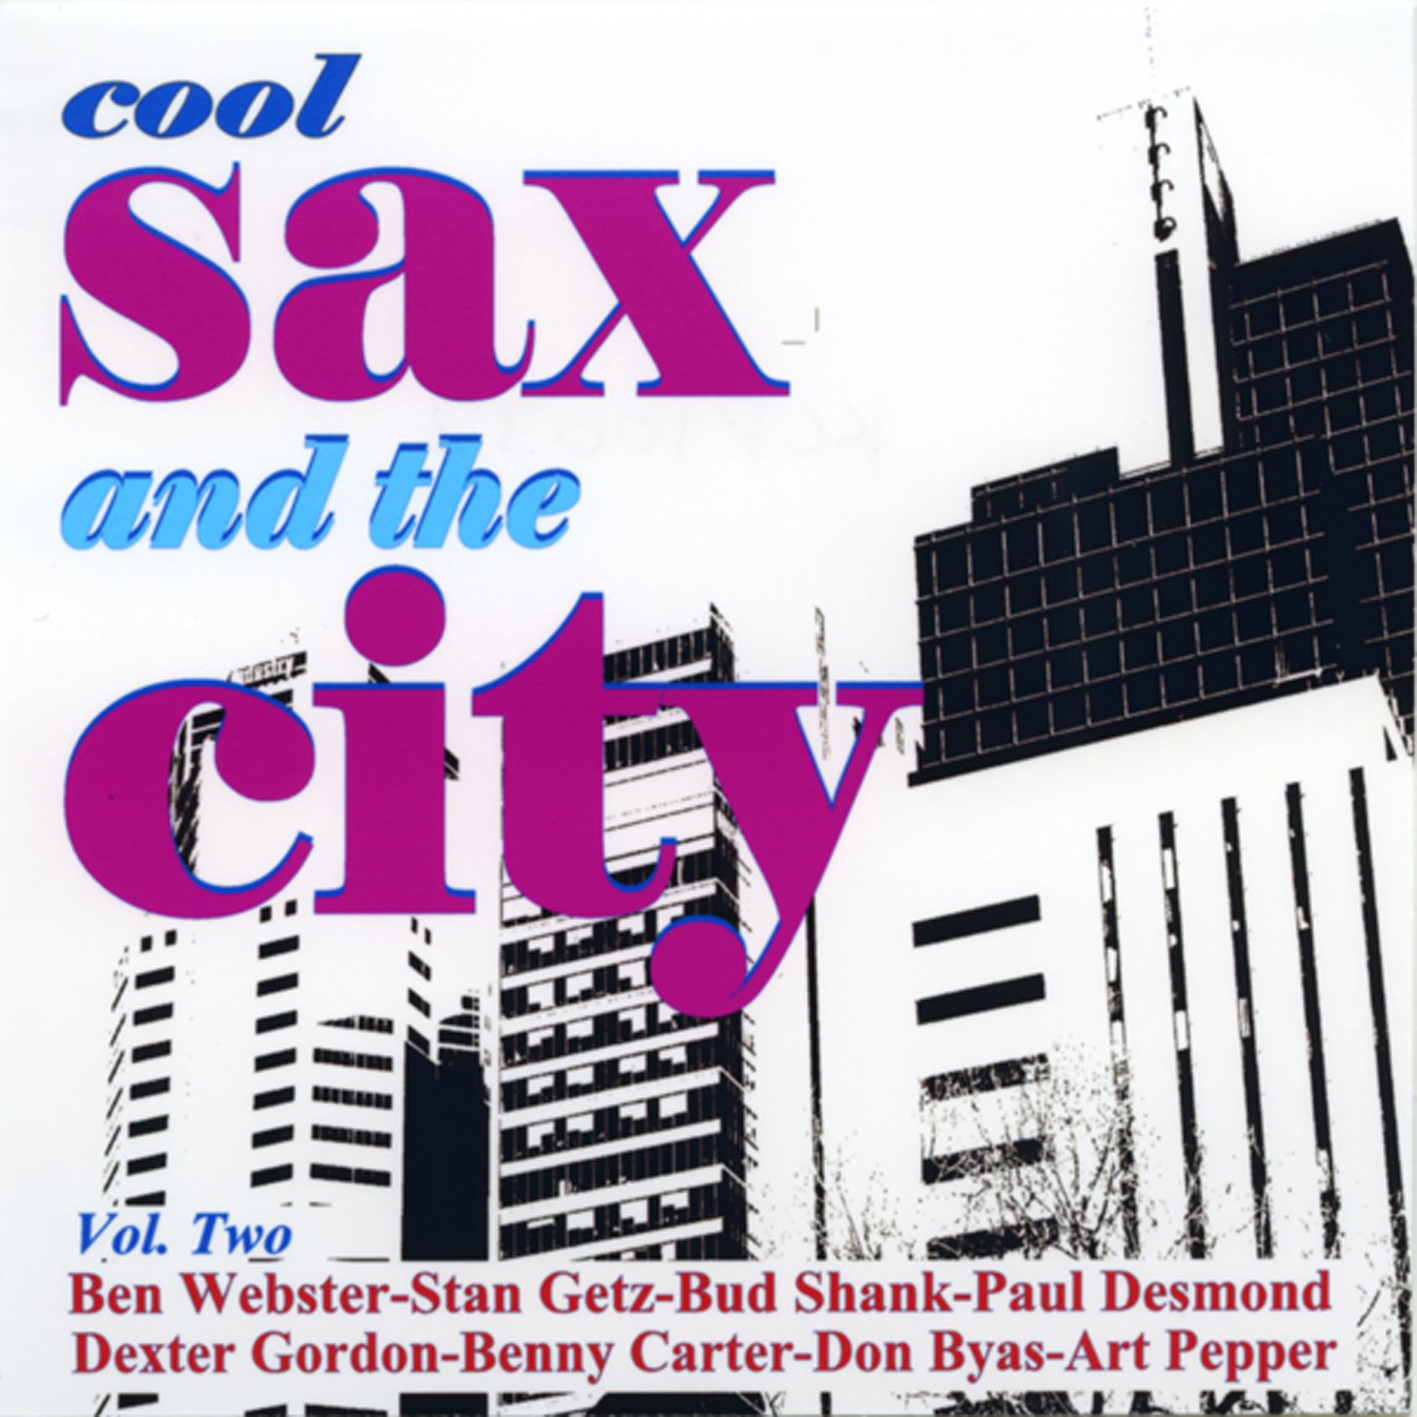 Cool Sax In The City - Vol. Two